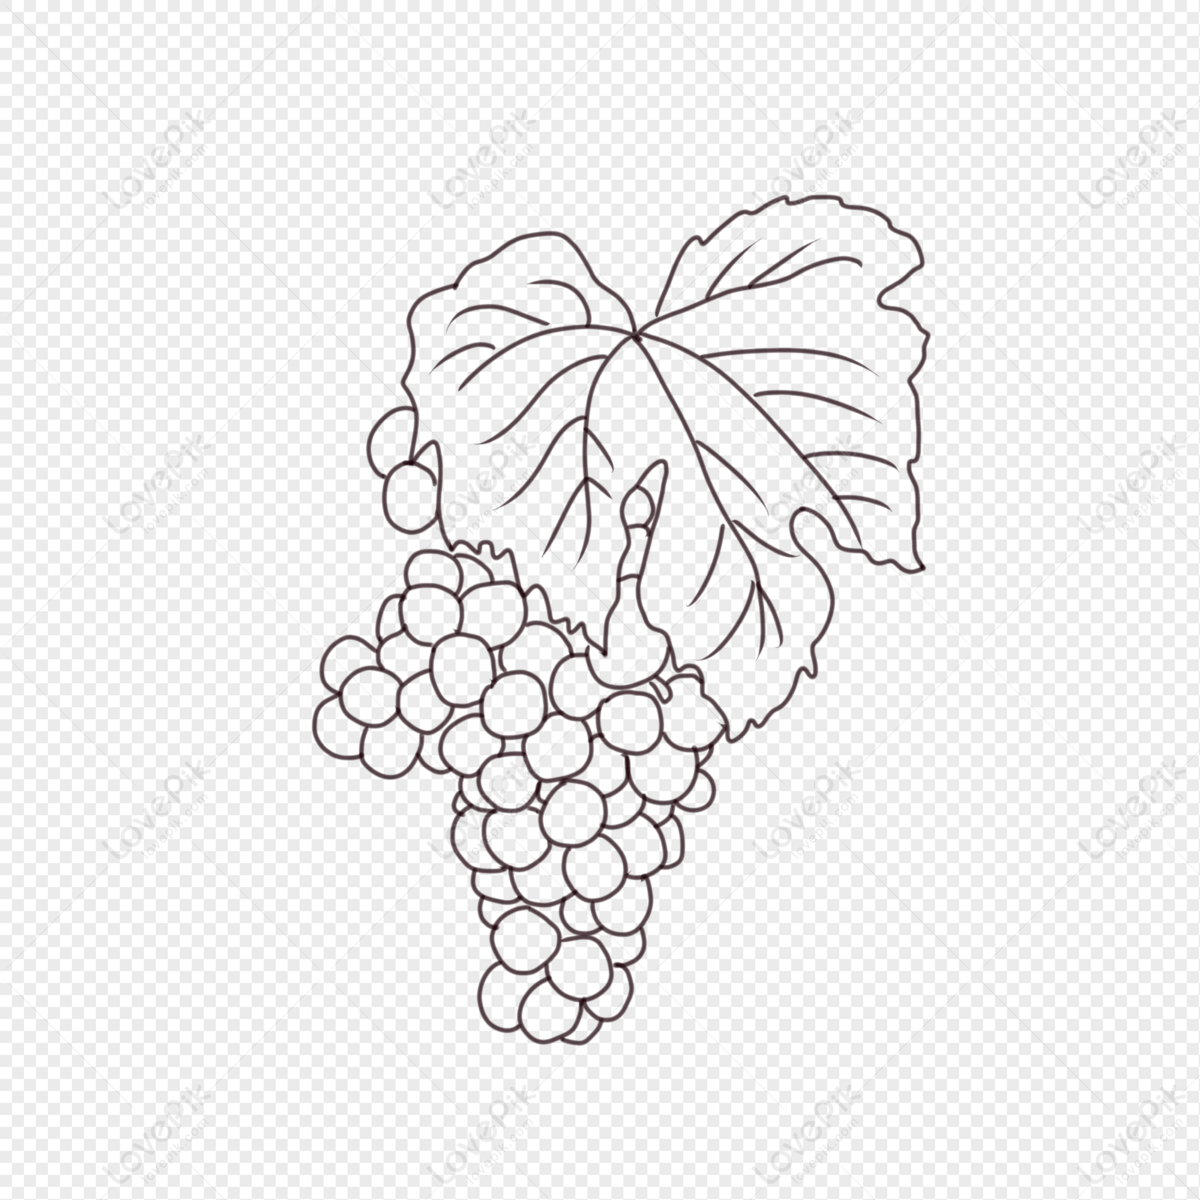 Line drawing of a grape in pencil style on Craiyon